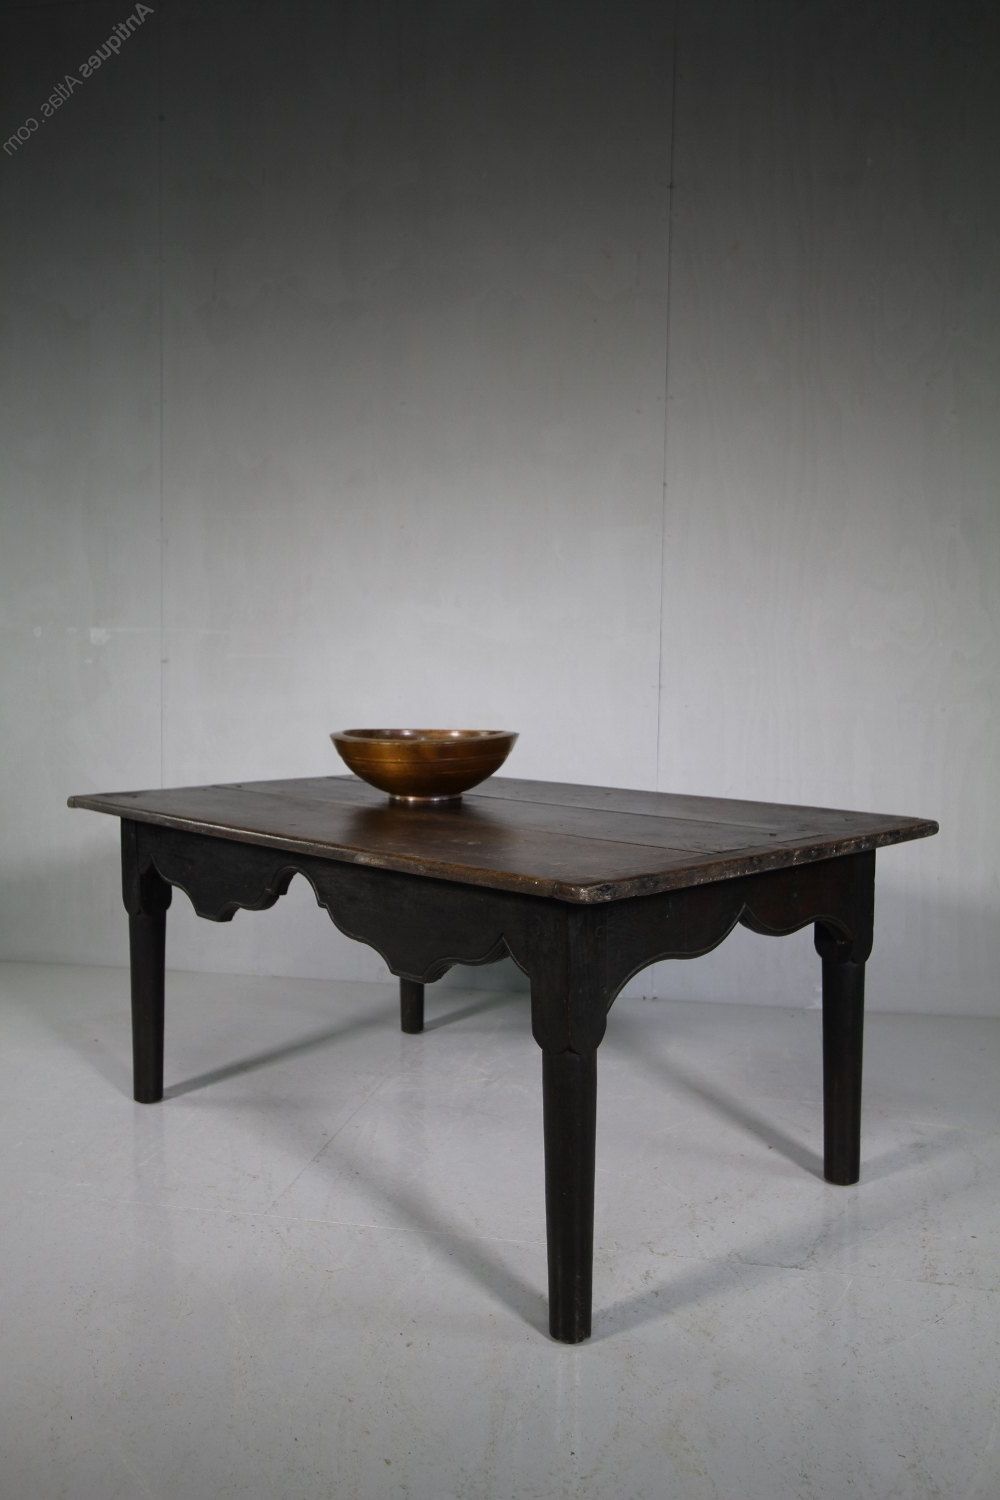 2019 Vintage Gray Oak Coffee Tables With Regard To Early 18th Century Antique Oak Low Coffee Table (Gallery 12 of 20)